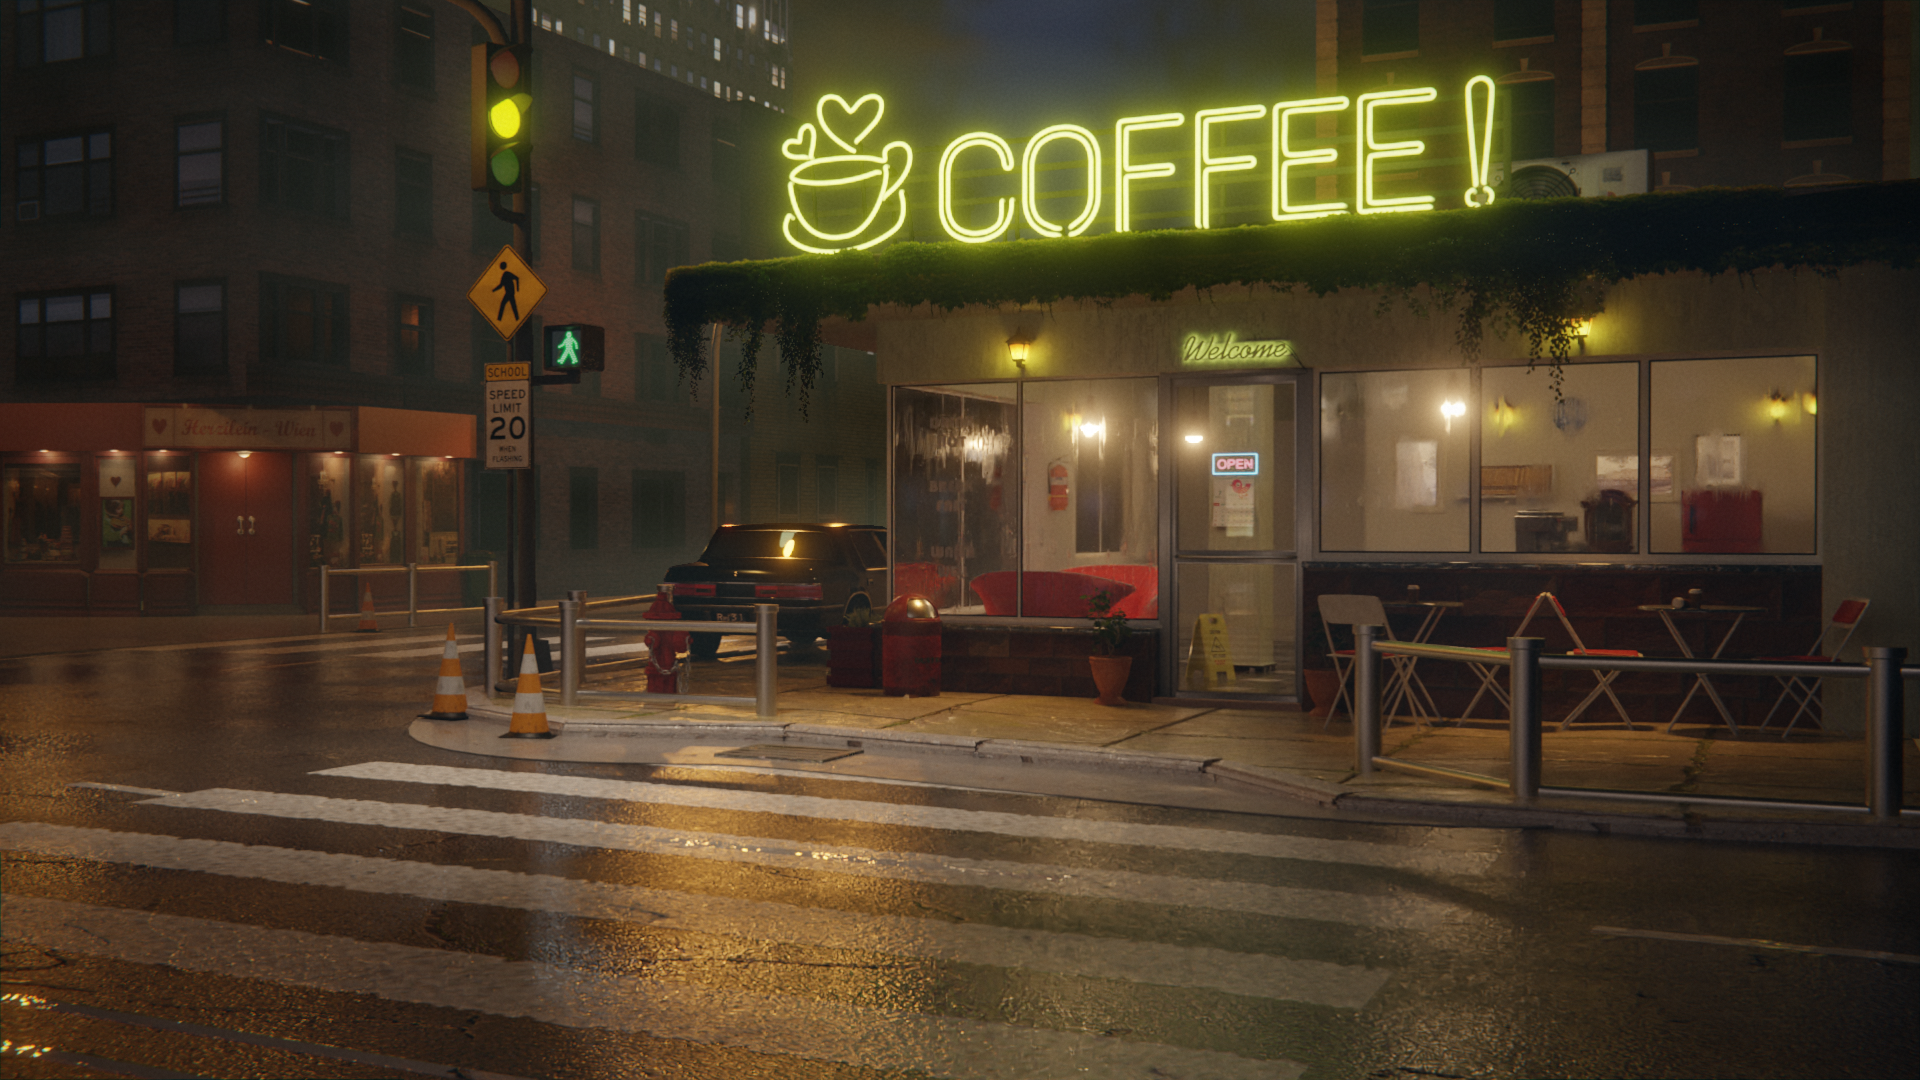 Recreated This Render After Being Inspired From Coffee Shop Lo Fi Music Live Stream From YouTube